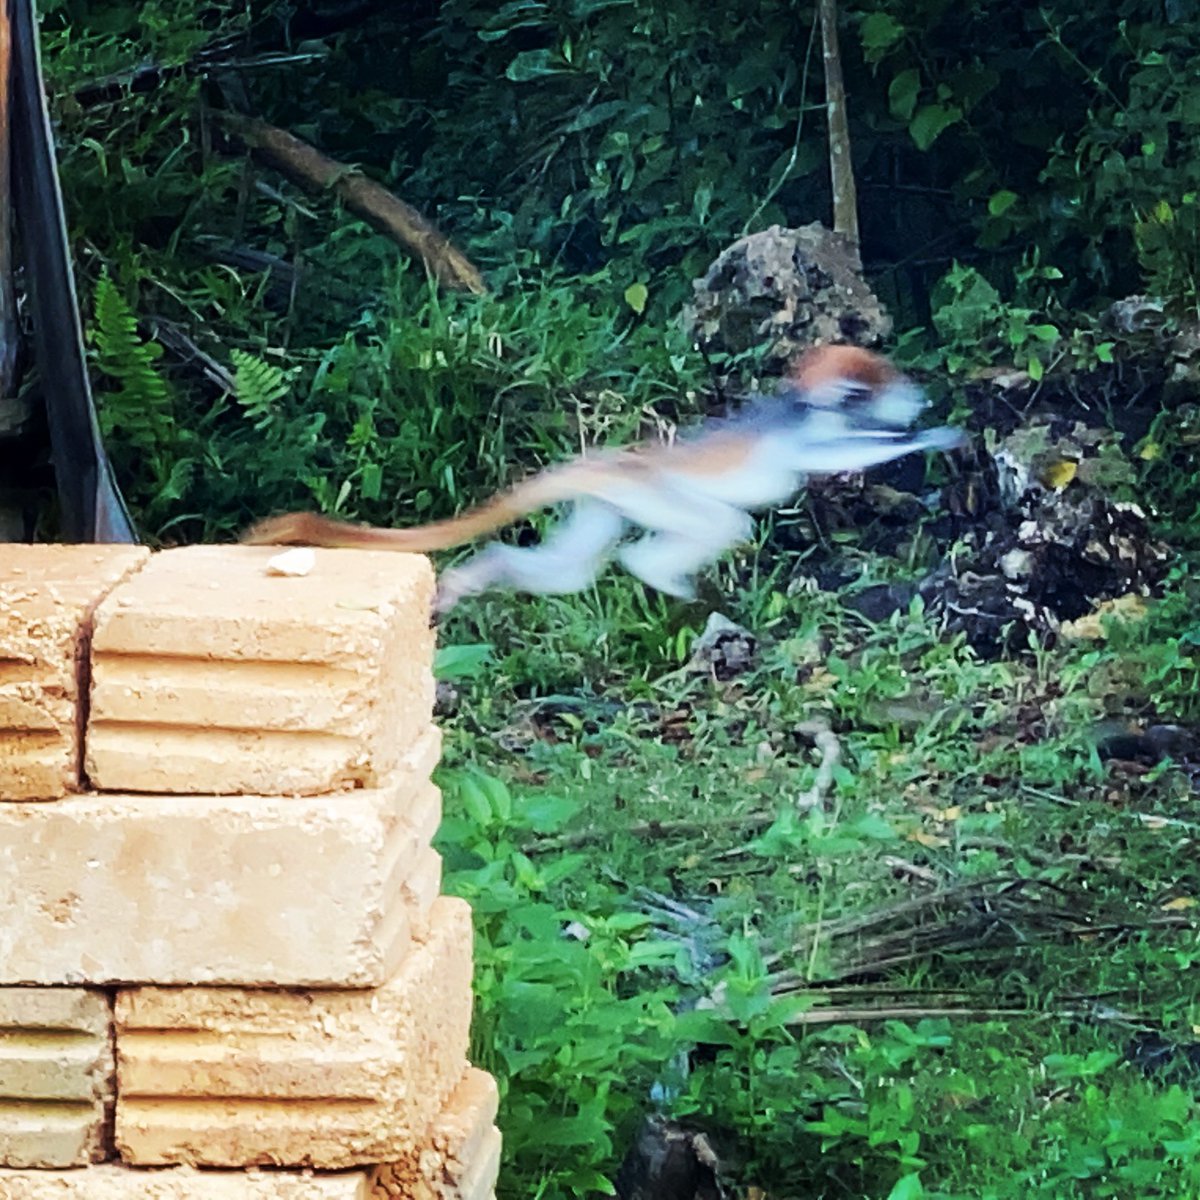 Baby colobus launches itself off a pile of bricks to follow its mummy.